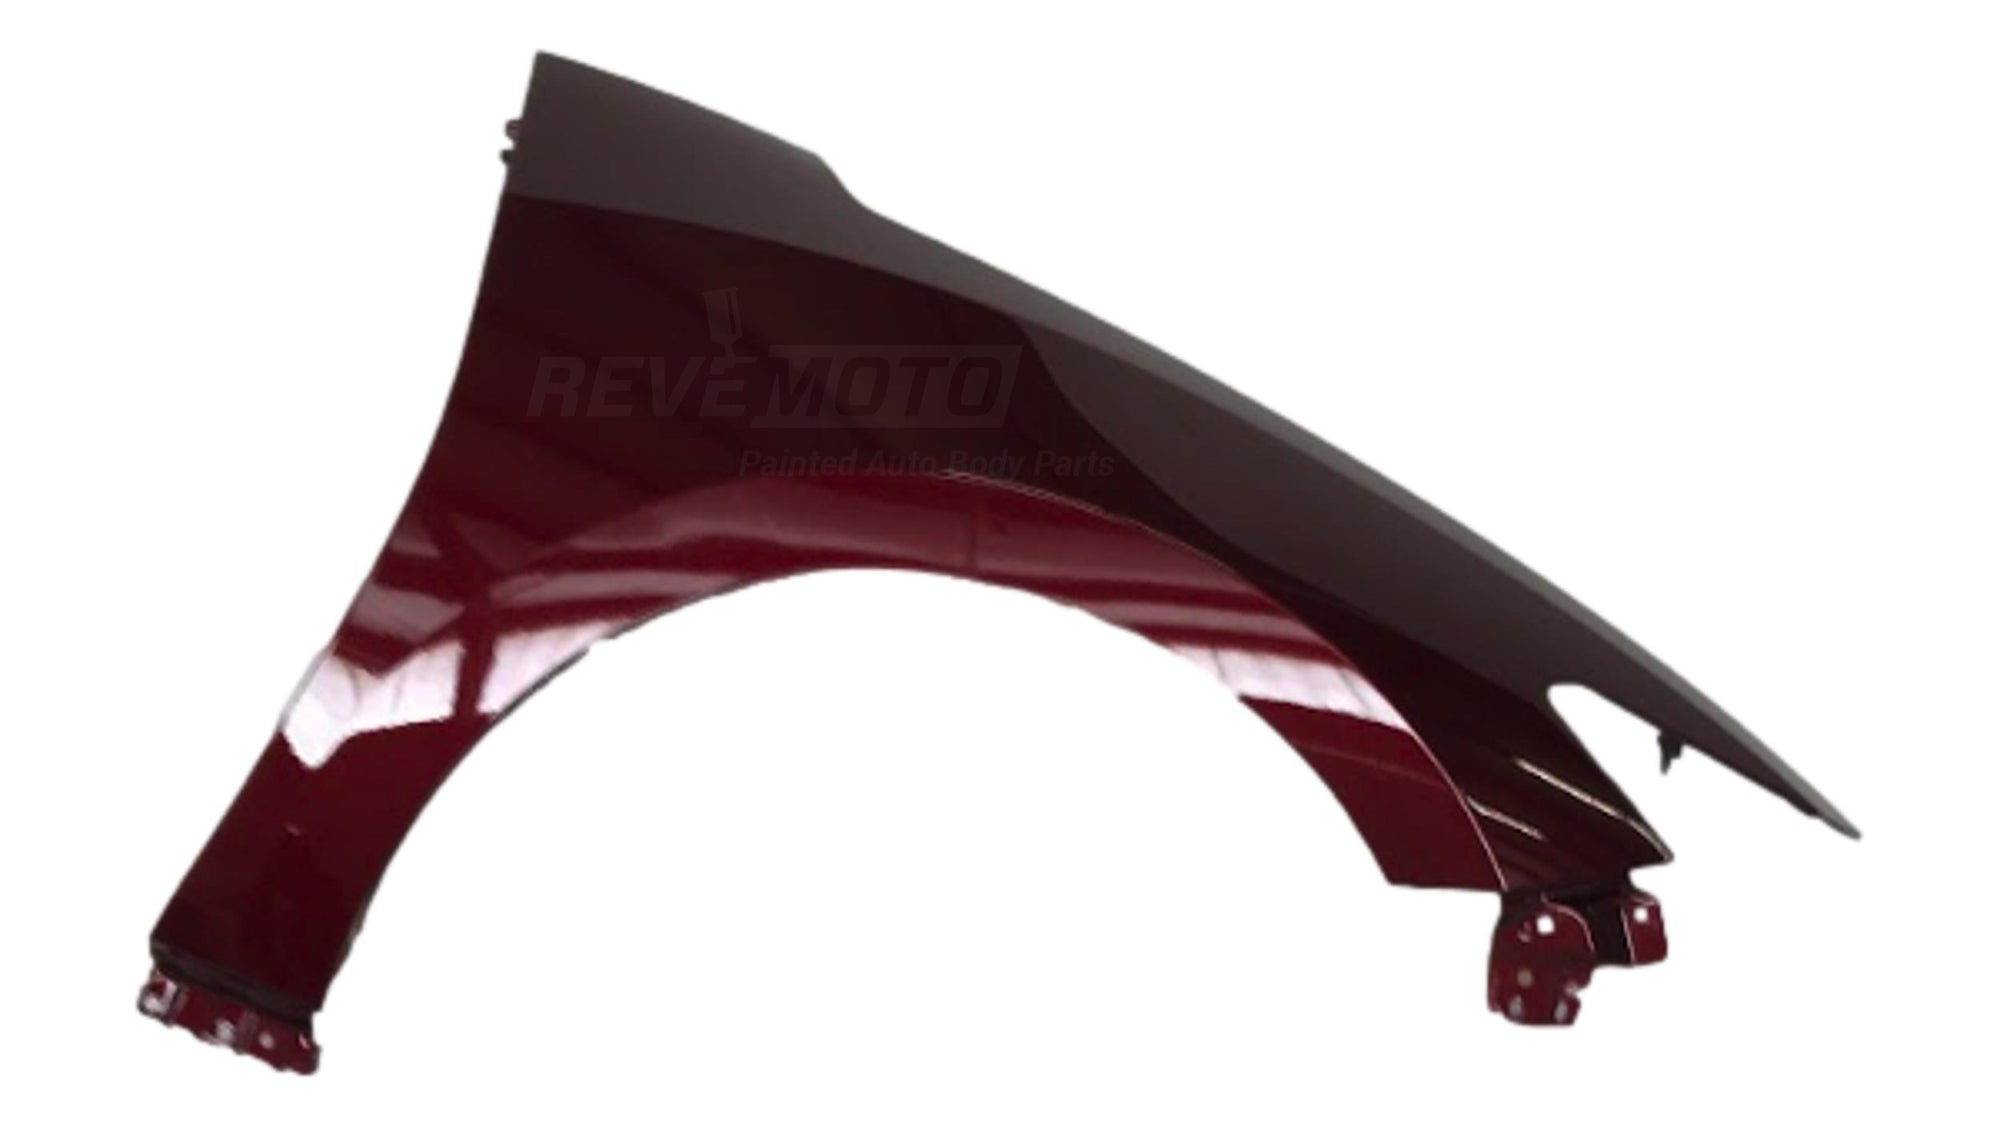 19719 - 2016-2020 Nissan Maxima Fender Painted Right, Passenger Side Coulis Red Metallic (NAW) 631004RA0A